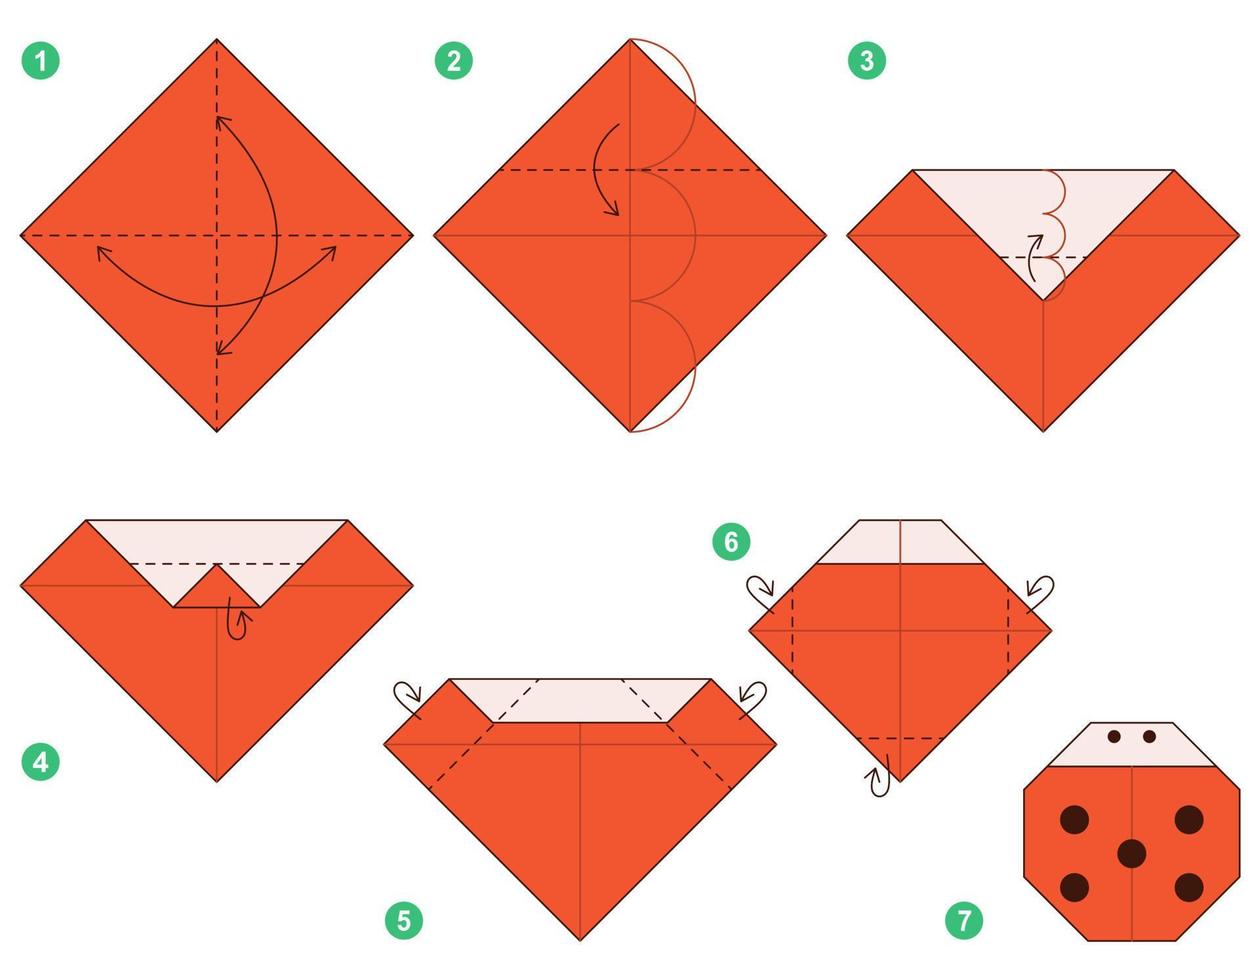 Ladybug origami scheme tutorial moving model. Origami for kids. Step by step how to make a cute origami ladybug. Vector illustration.